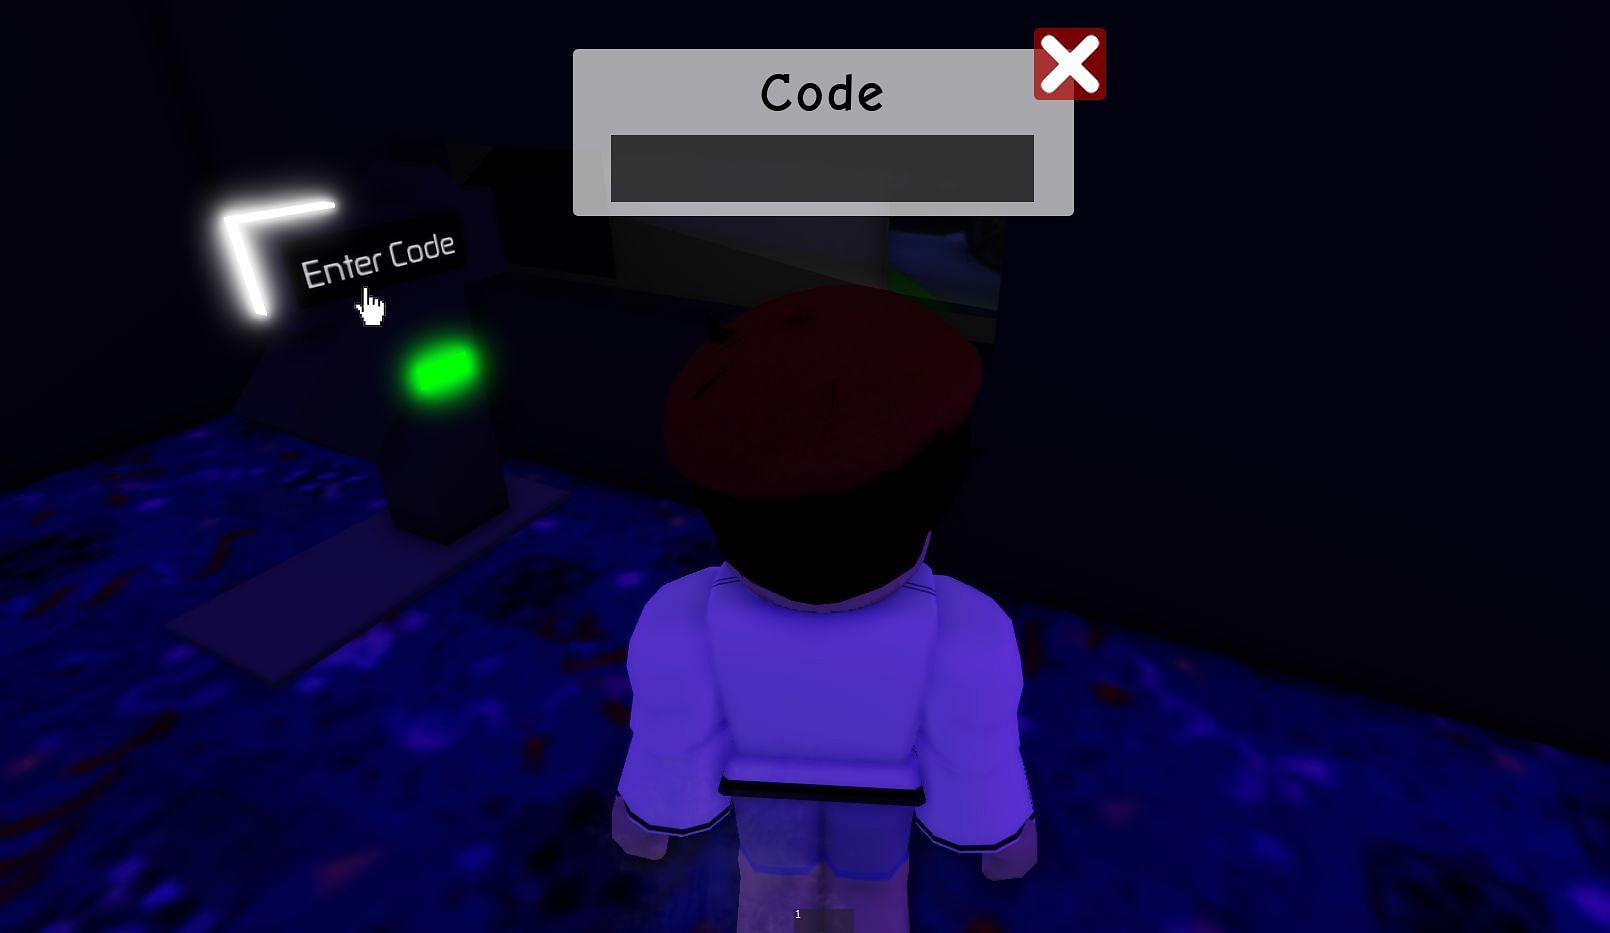 Use the code on the movie projector. (Image via Roblox)